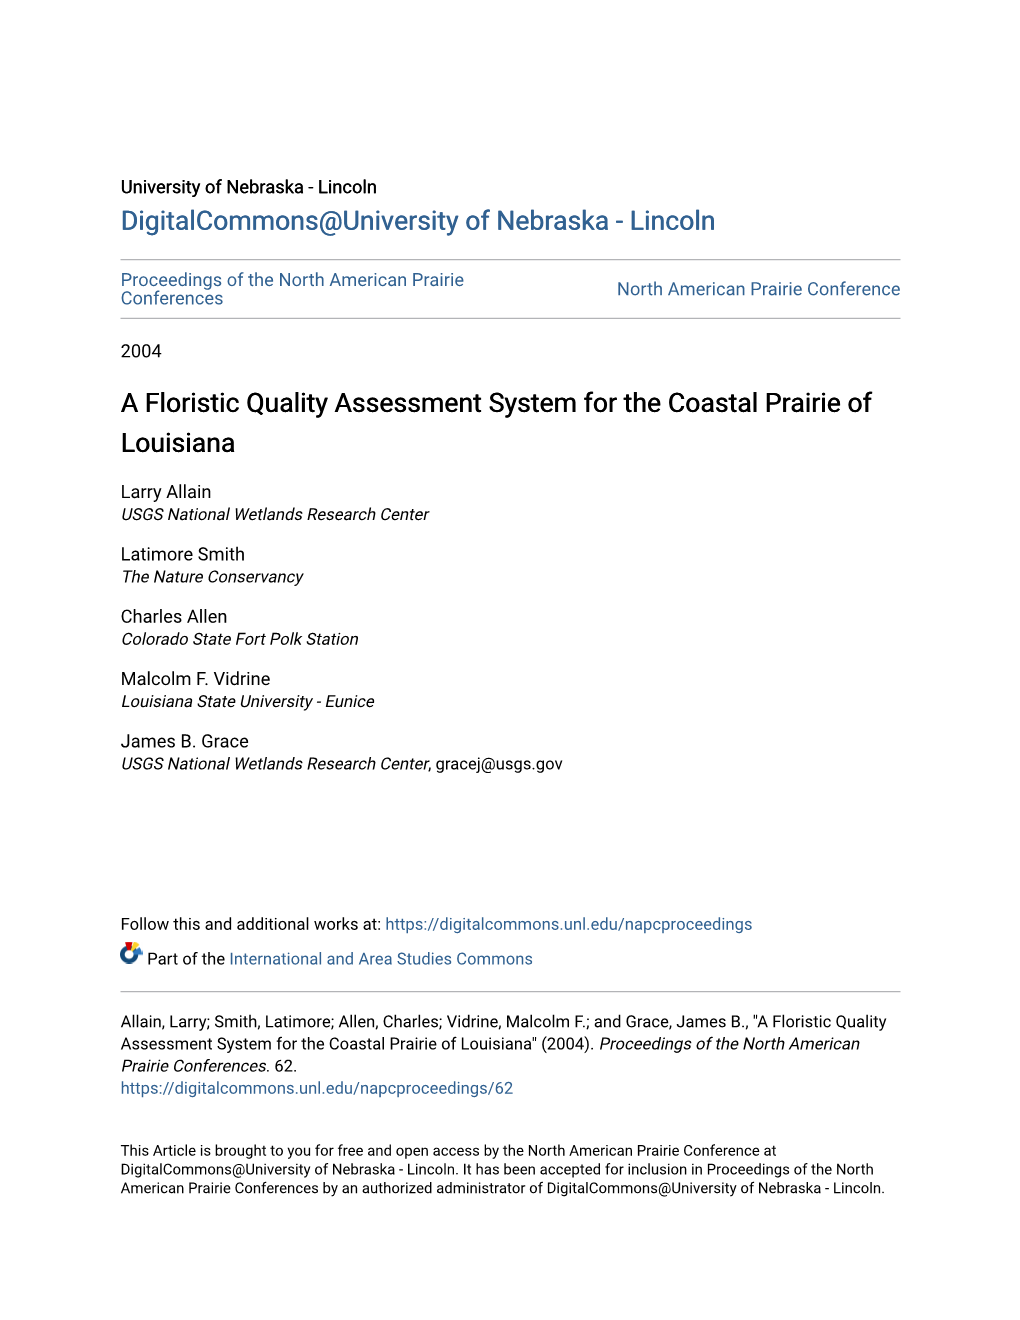 A Floristic Quality Assessment System for the Coastal Prairie of Louisiana